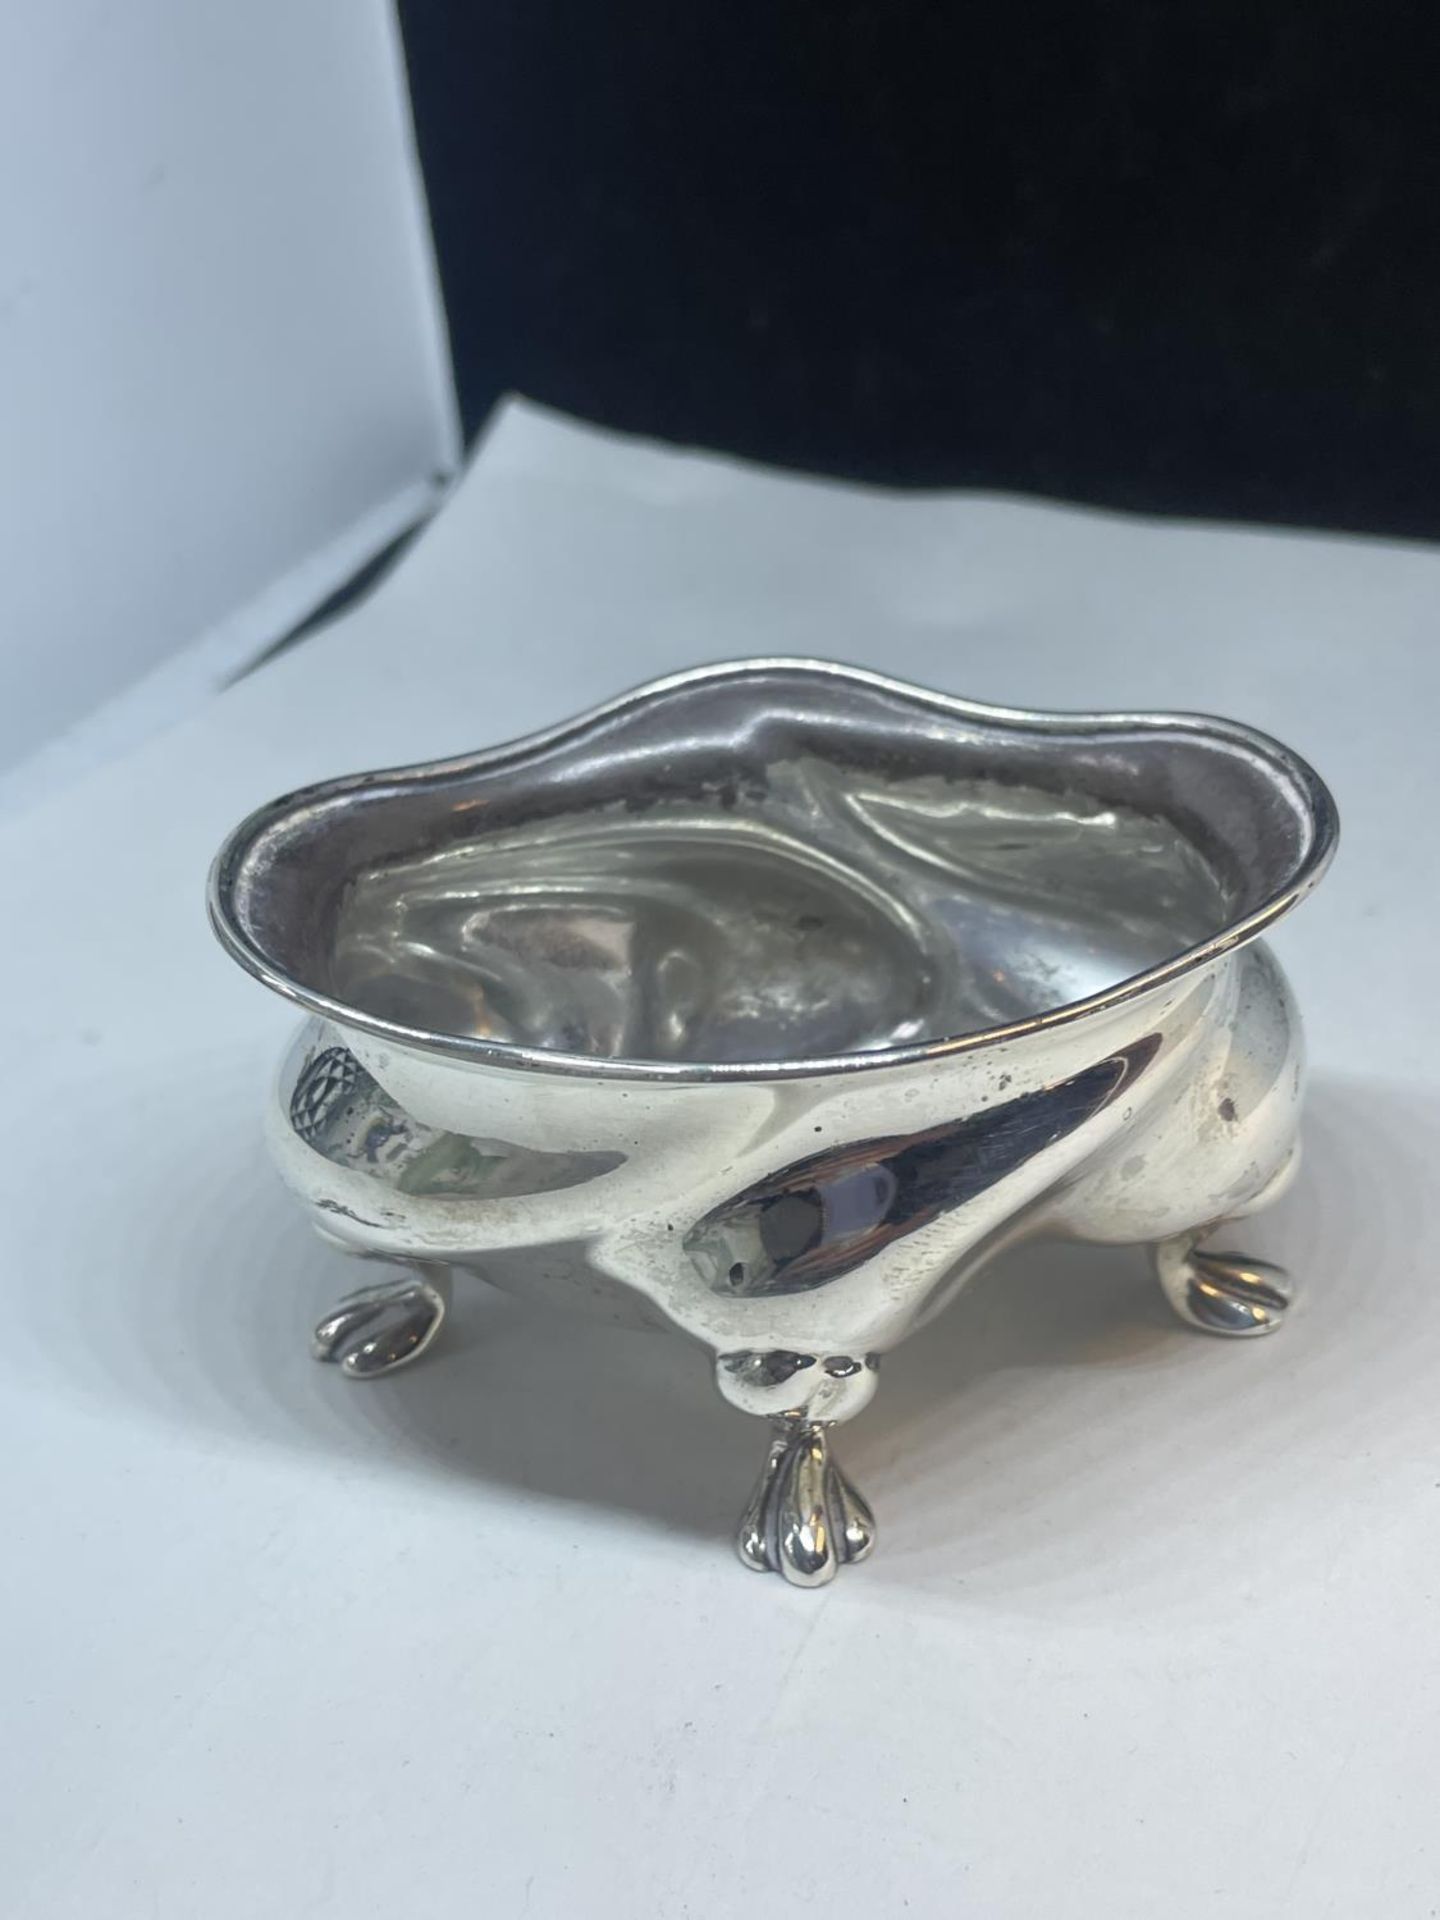 A HALLMARKED BIRMINGHAM SILVER FOOTED OVAL DISH GROSS WEIGHT 77.08 GRAMS